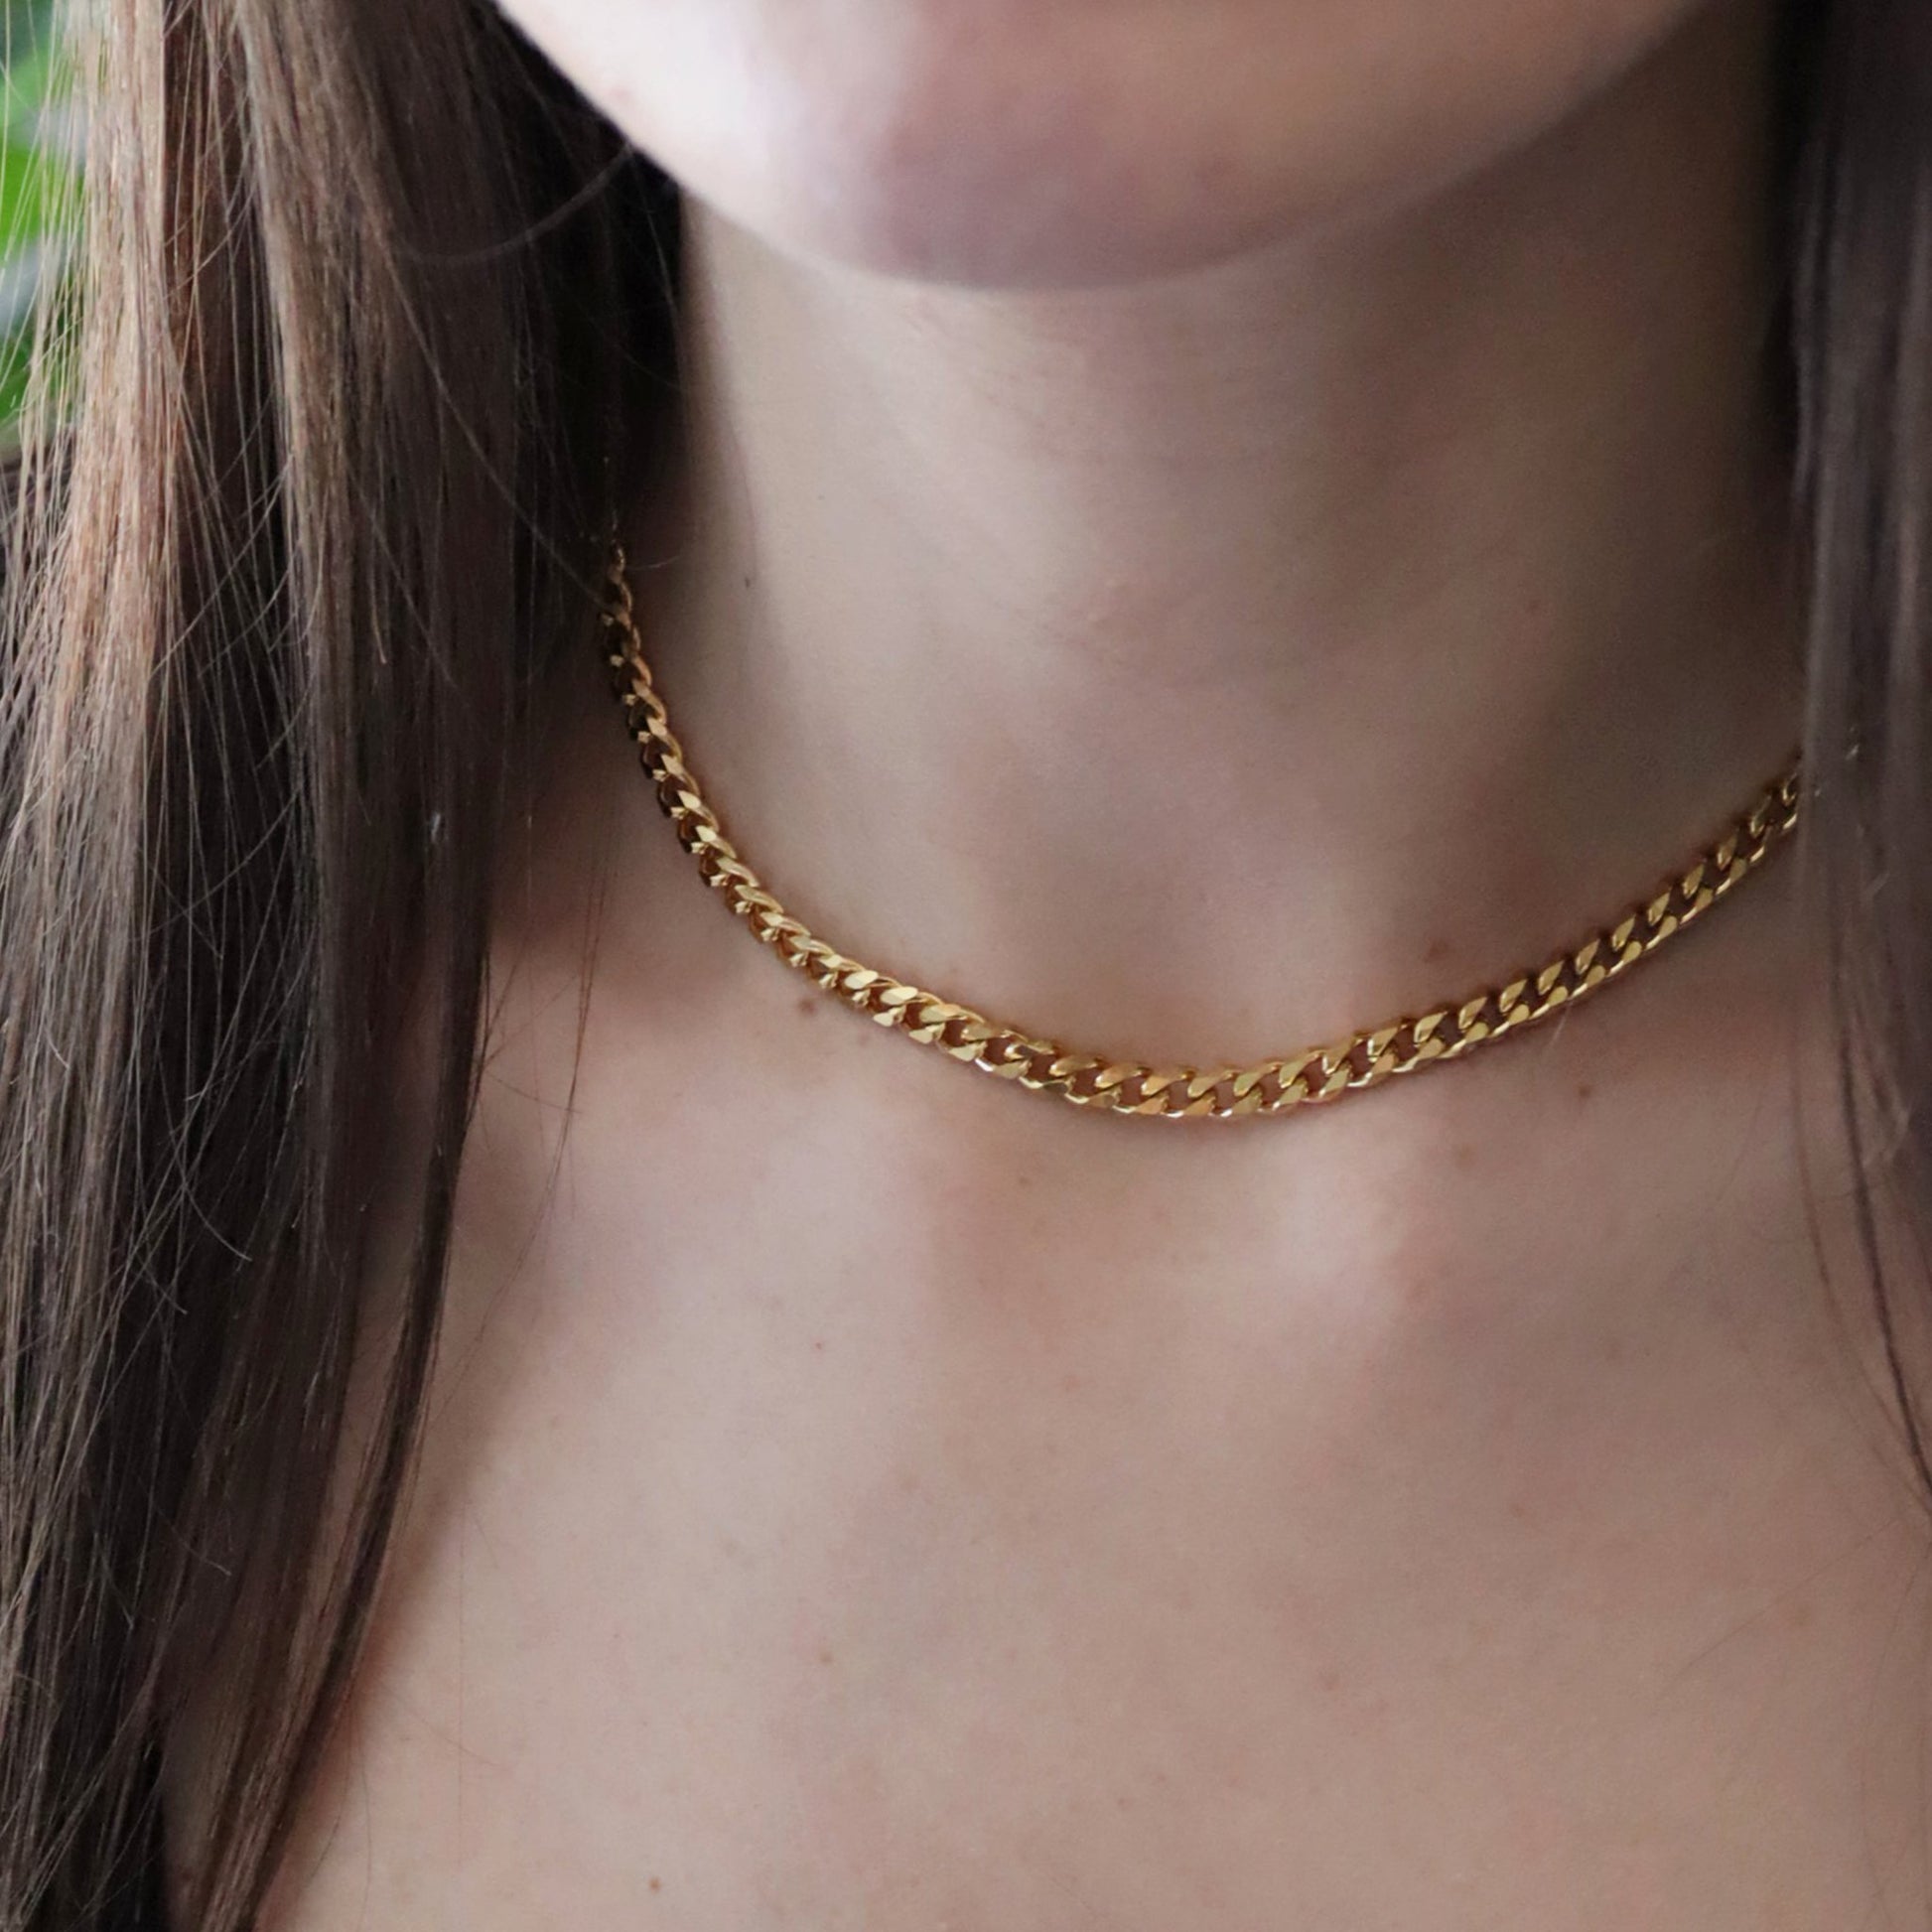 Gold Plated Thick Waterproof Water Resistant Necklace Curb Chain